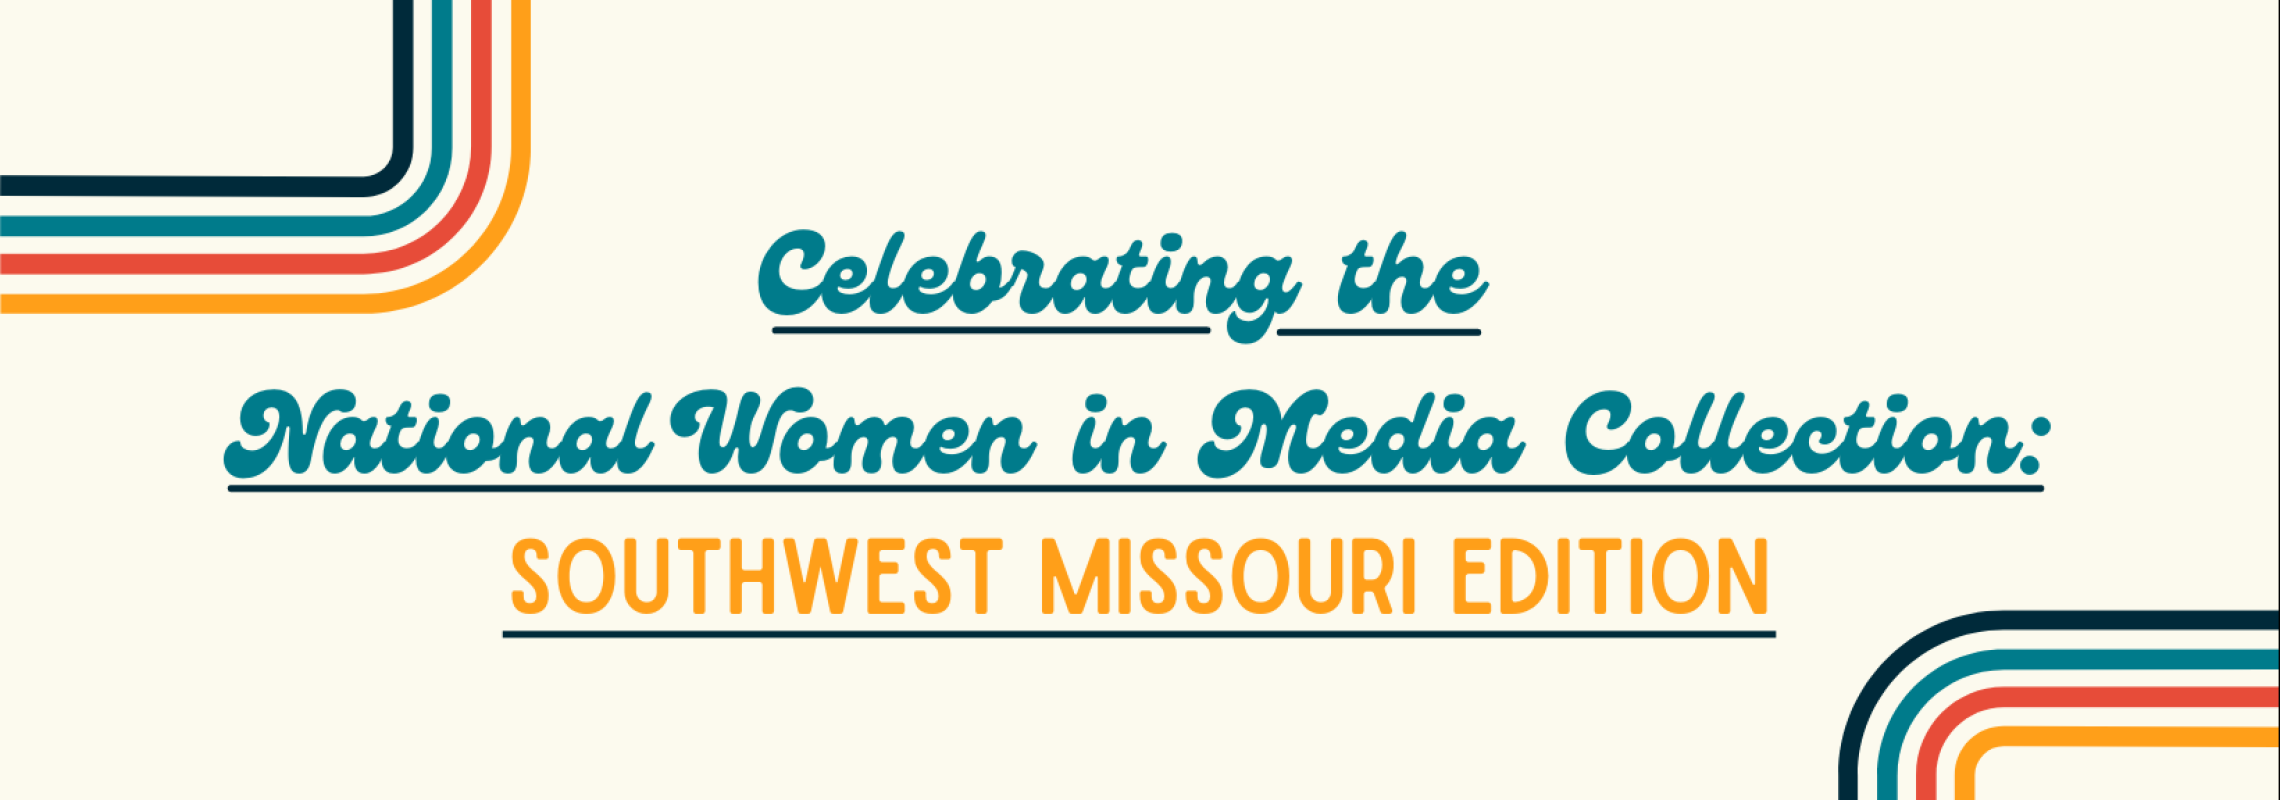 Celebrating the National Women in Media Collection Southwest Missouri Edition